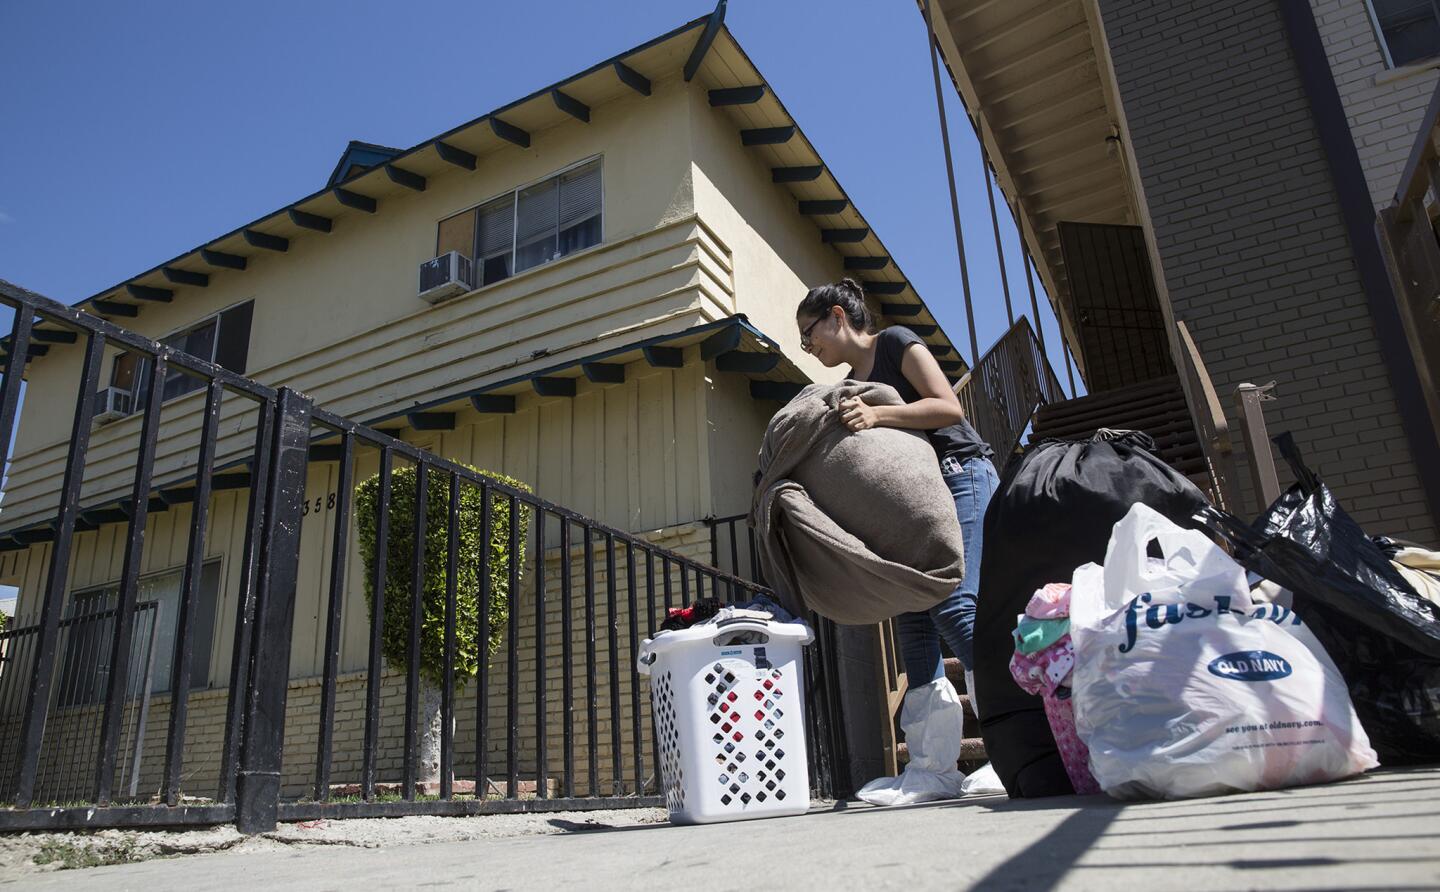 52nd Street resident Fatima Hernandez retrieves belongings from her home adjacent to a metal recycling facility that burned in Maywood last week.